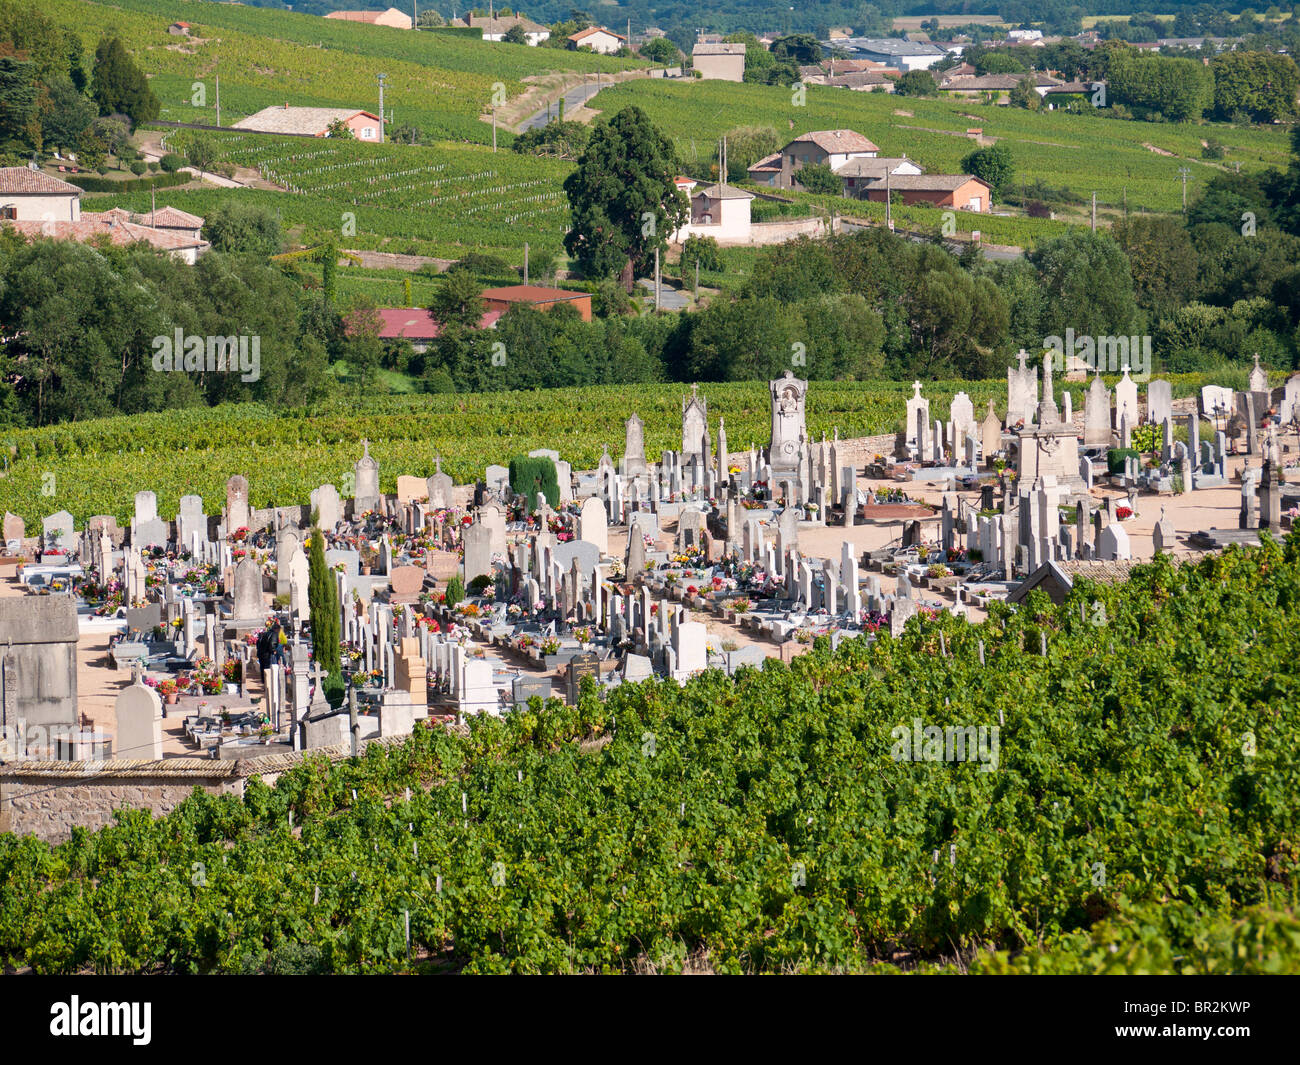 The Fleurie graveyard amidst the vineyards in Beaujolais, France Stock Photo